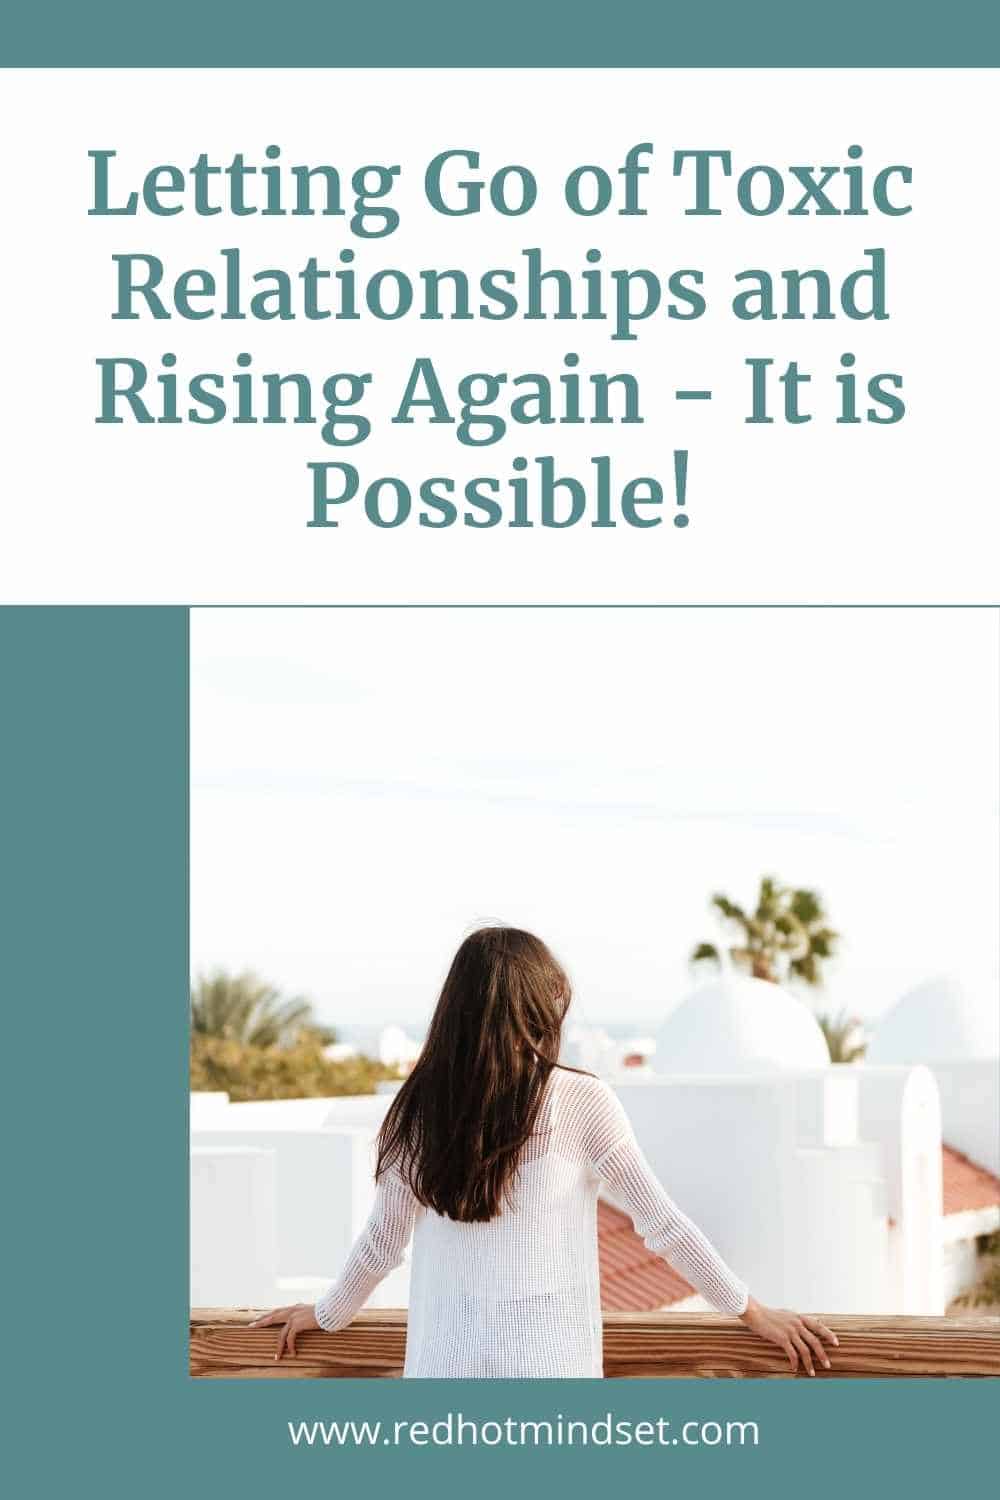 Letting Go of Toxic Relationships and Rising Again – It is Possible!